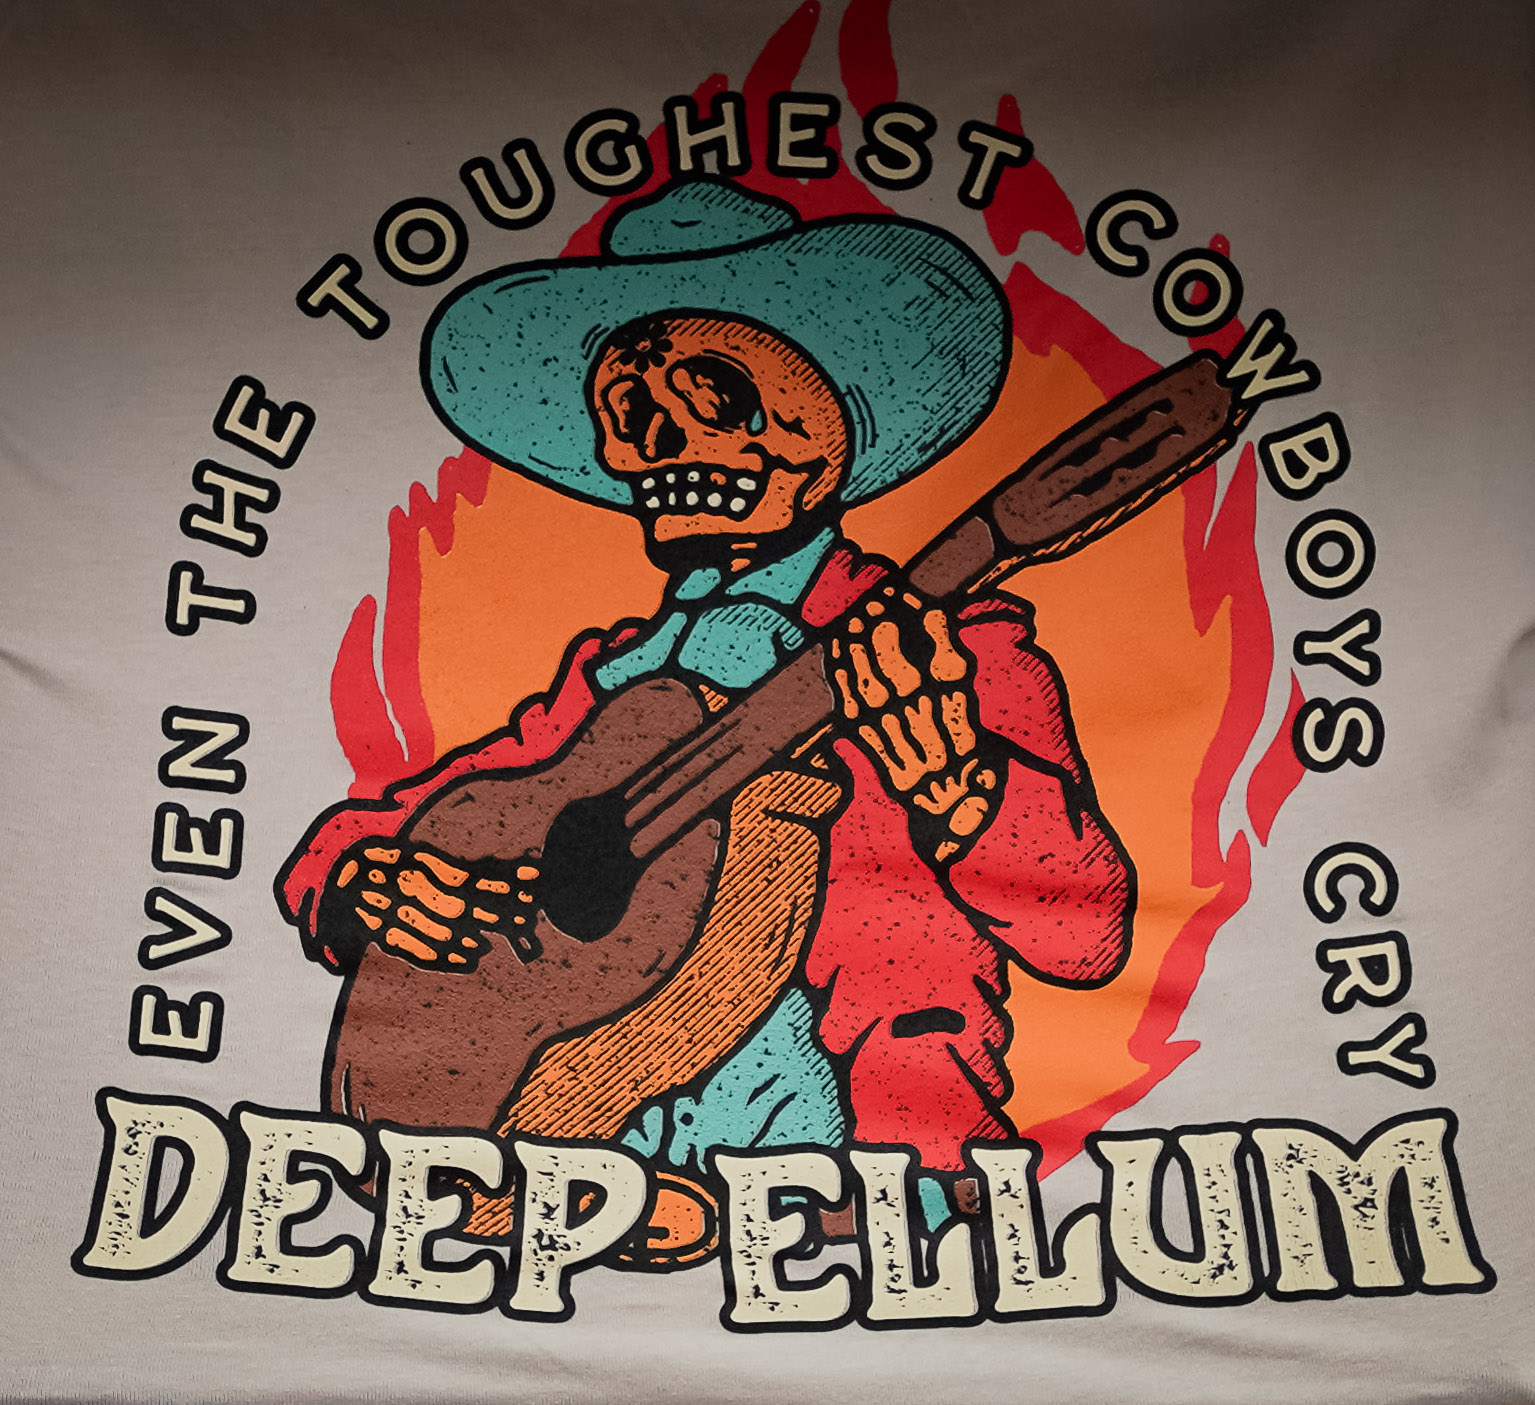 A t-shirt design with a skeleton cowboy playing guitar